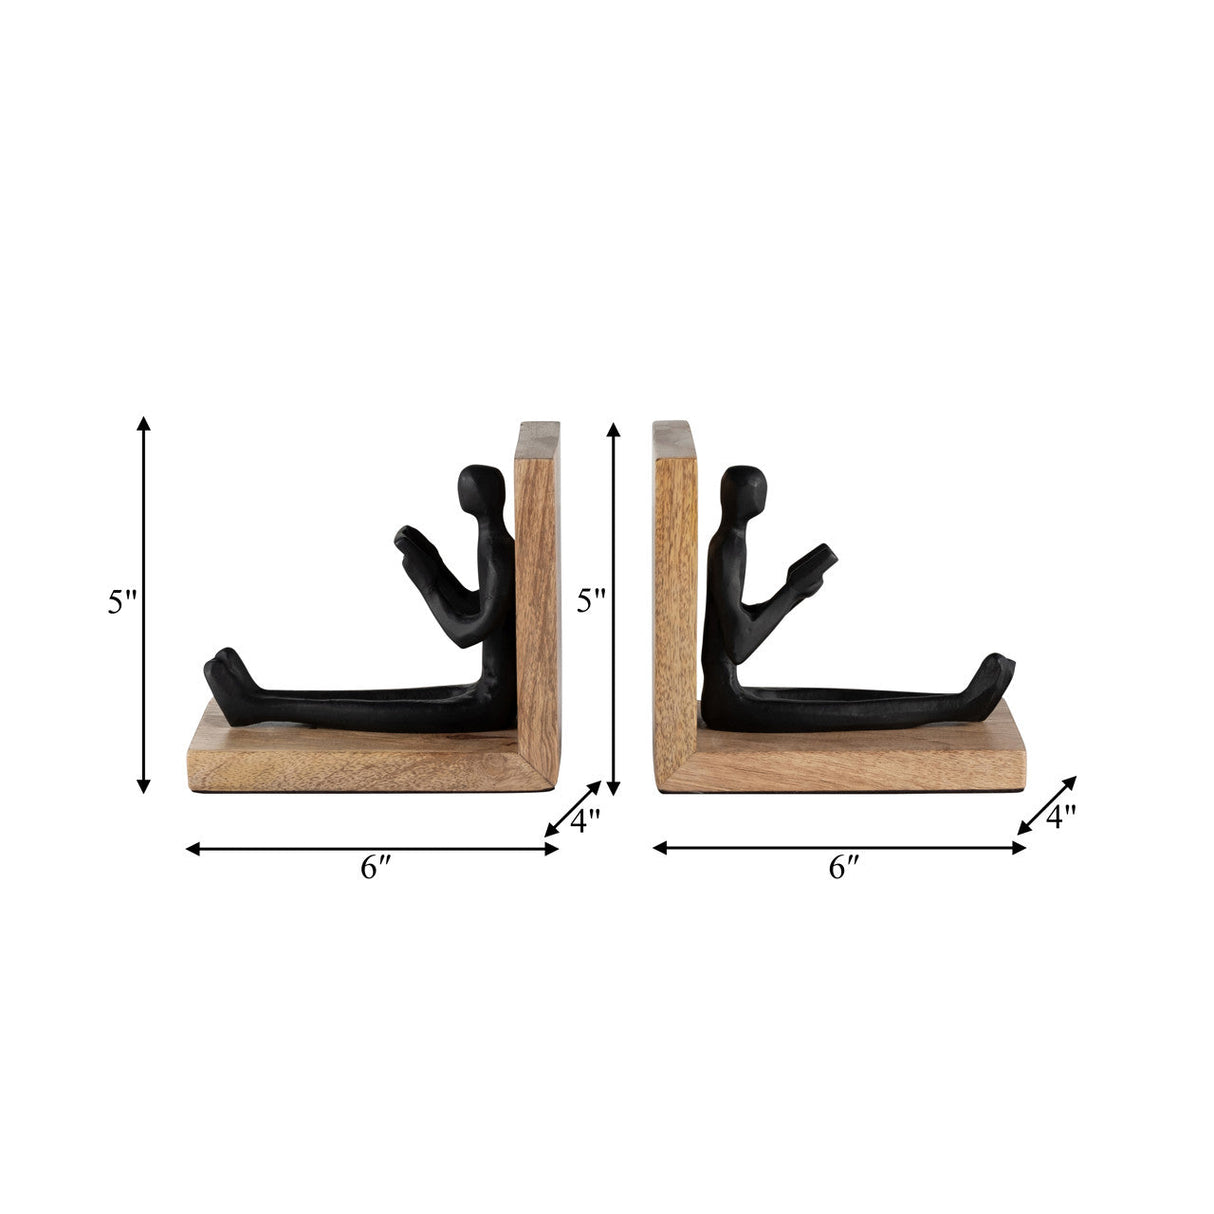 Wood, S/2 6" Man Reading Bookends, Brown/black